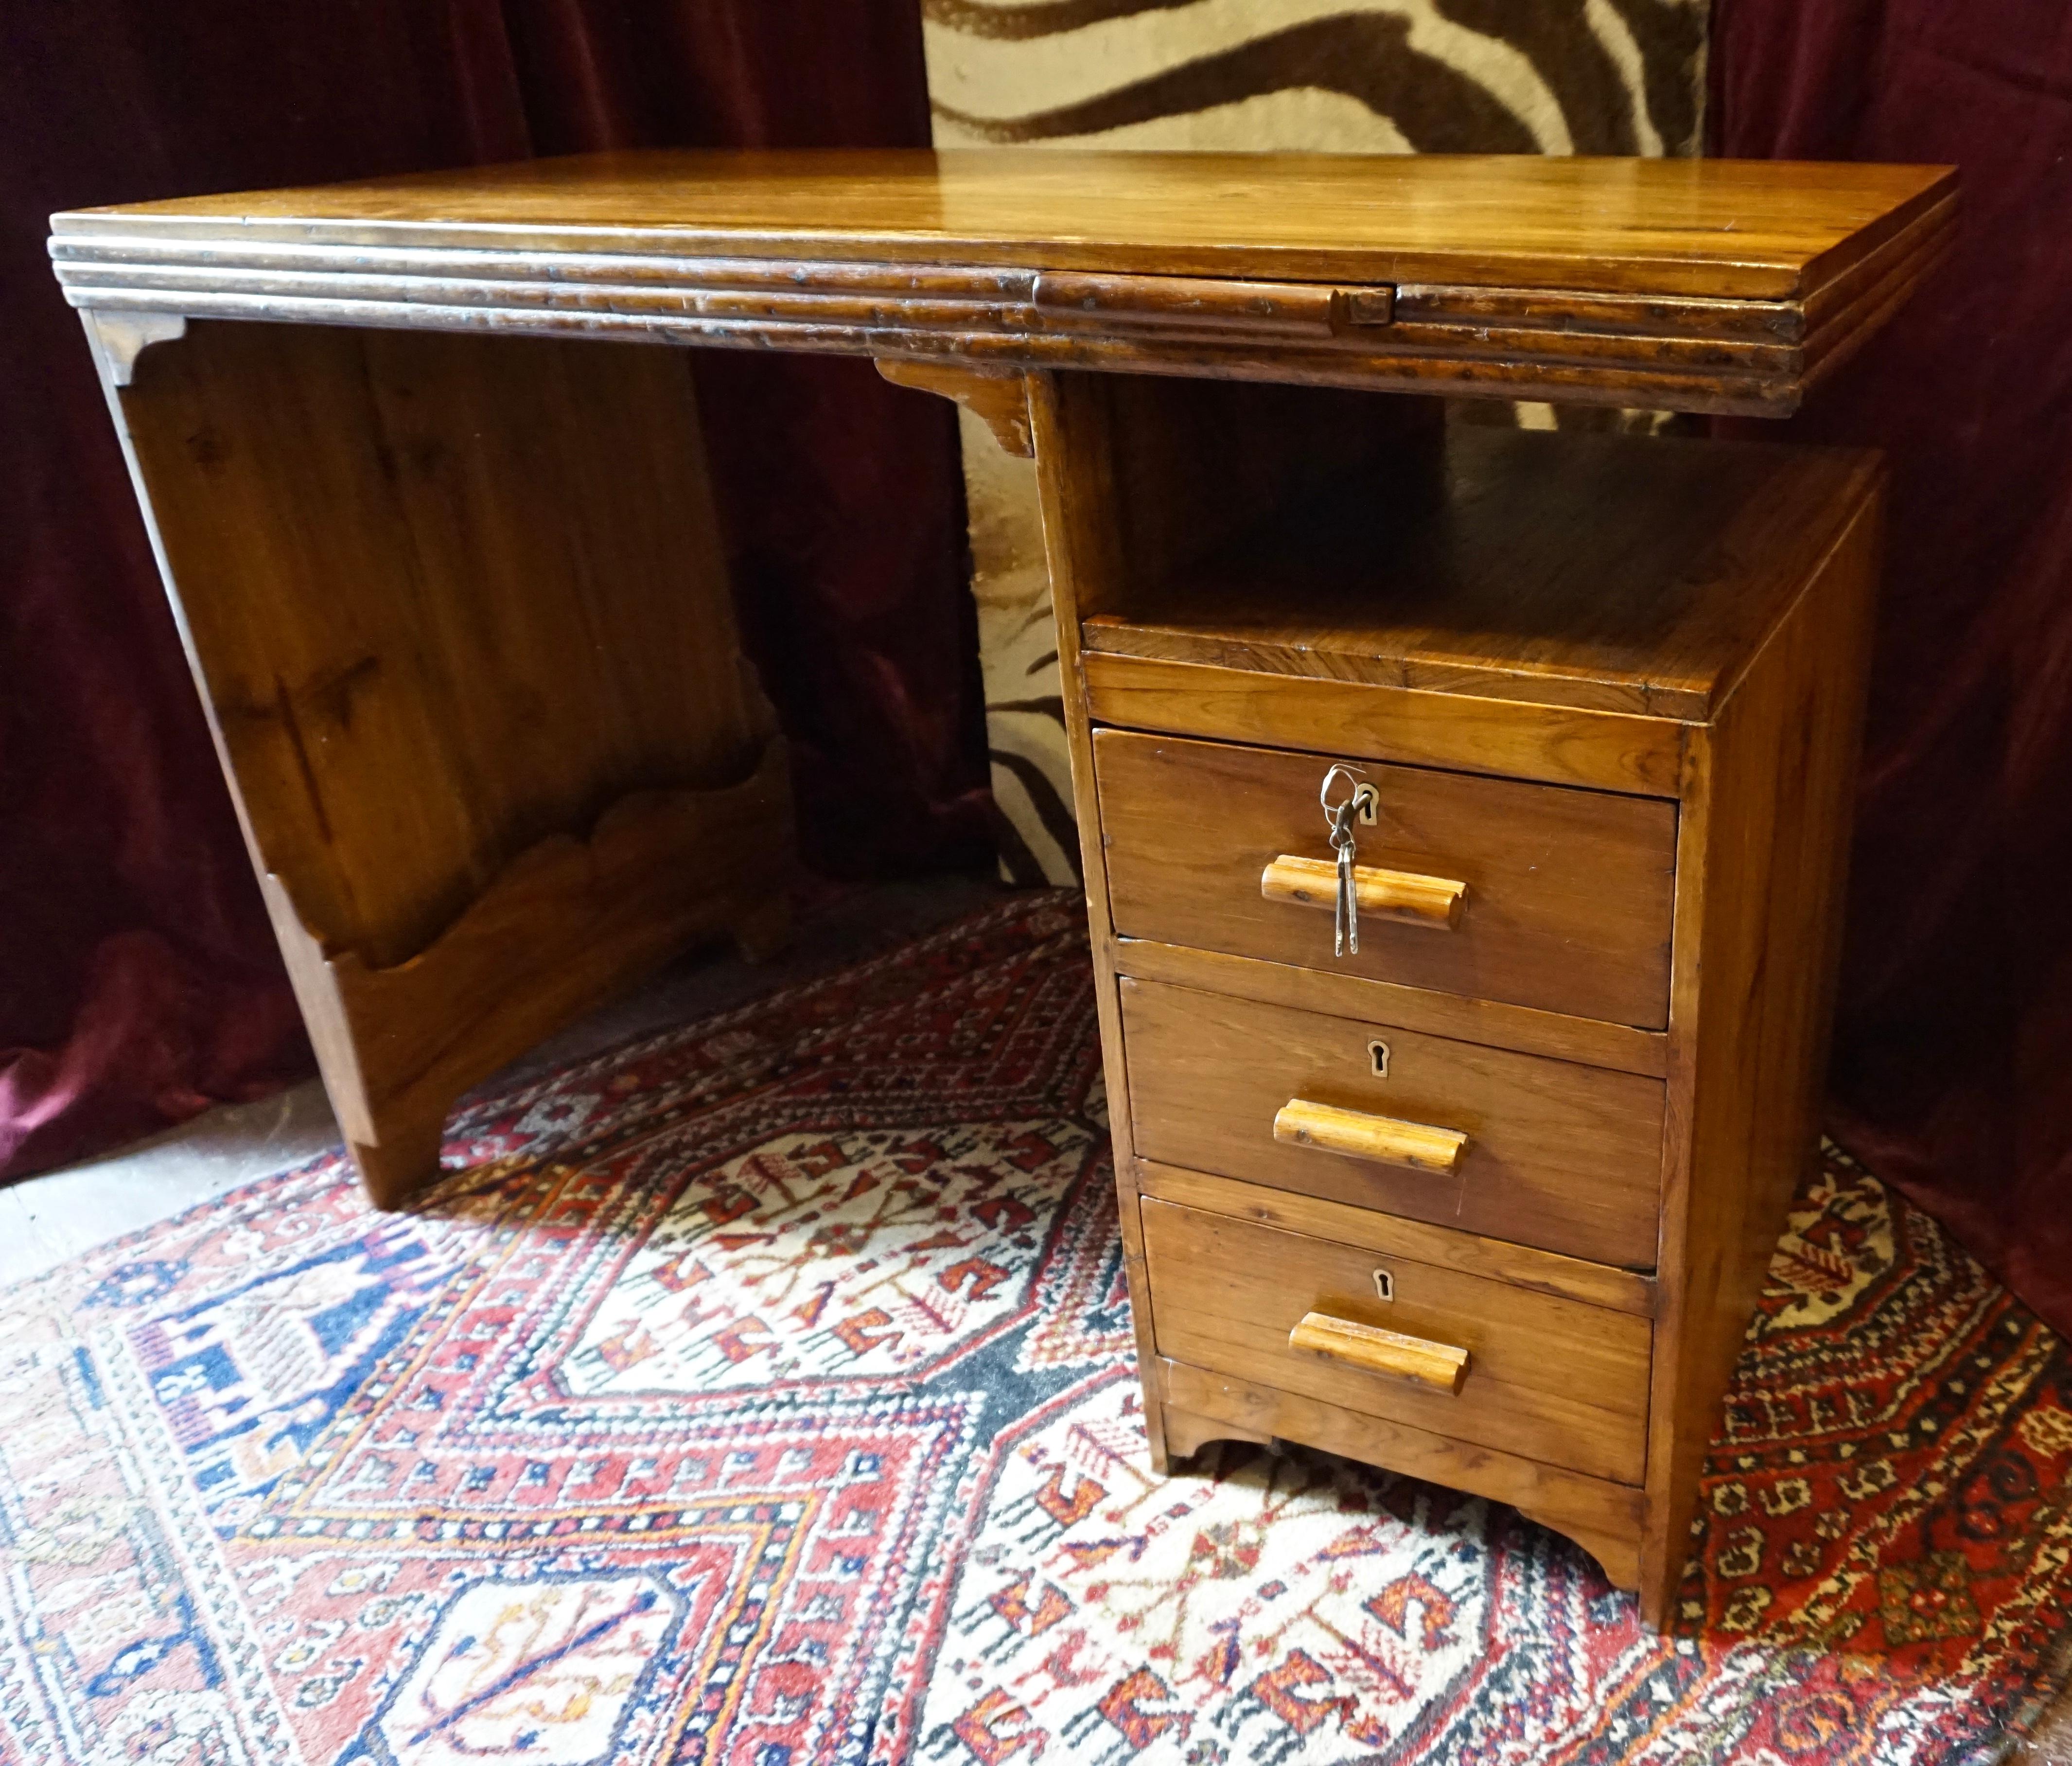 British Indian Ocean Territory Art Deco Solid Teak Writing Table With Floating Shelf, Jotter & Side Storage For Sale